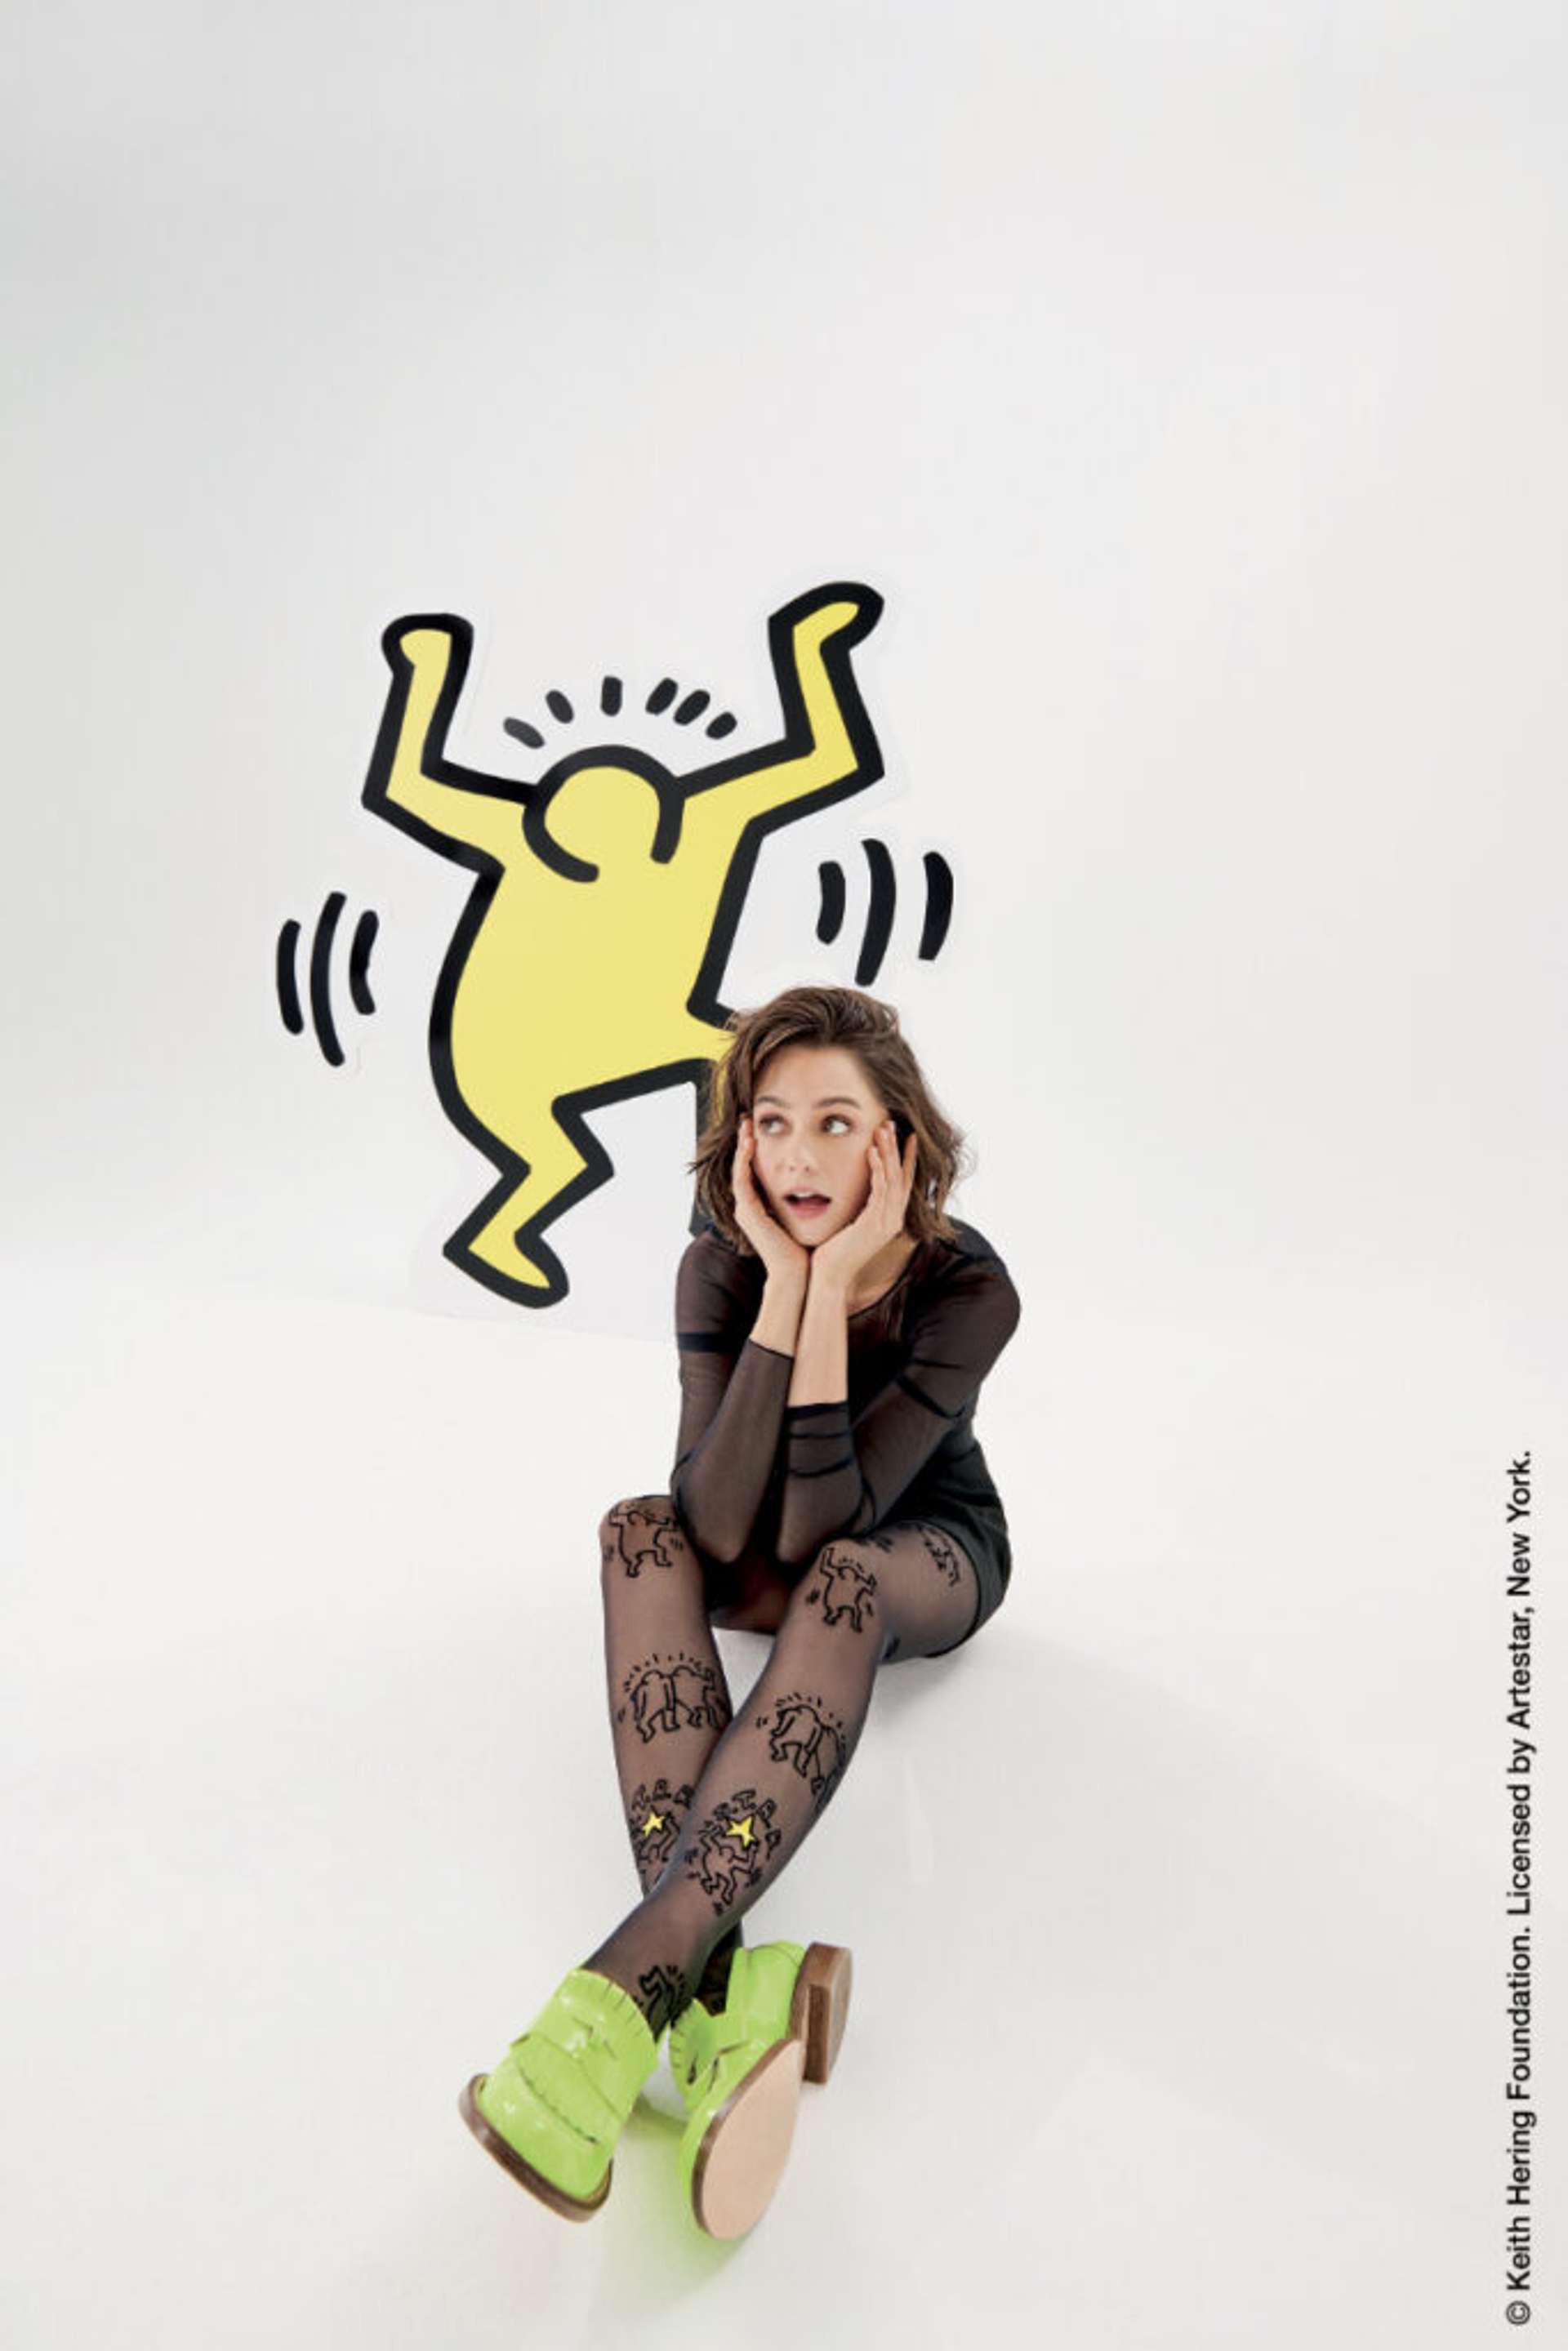 An image of a model wearing Calzedonia tights featuring some of Keith Haring’s designs, standing against a background decorated with one of the artist’s signature silhouettes.